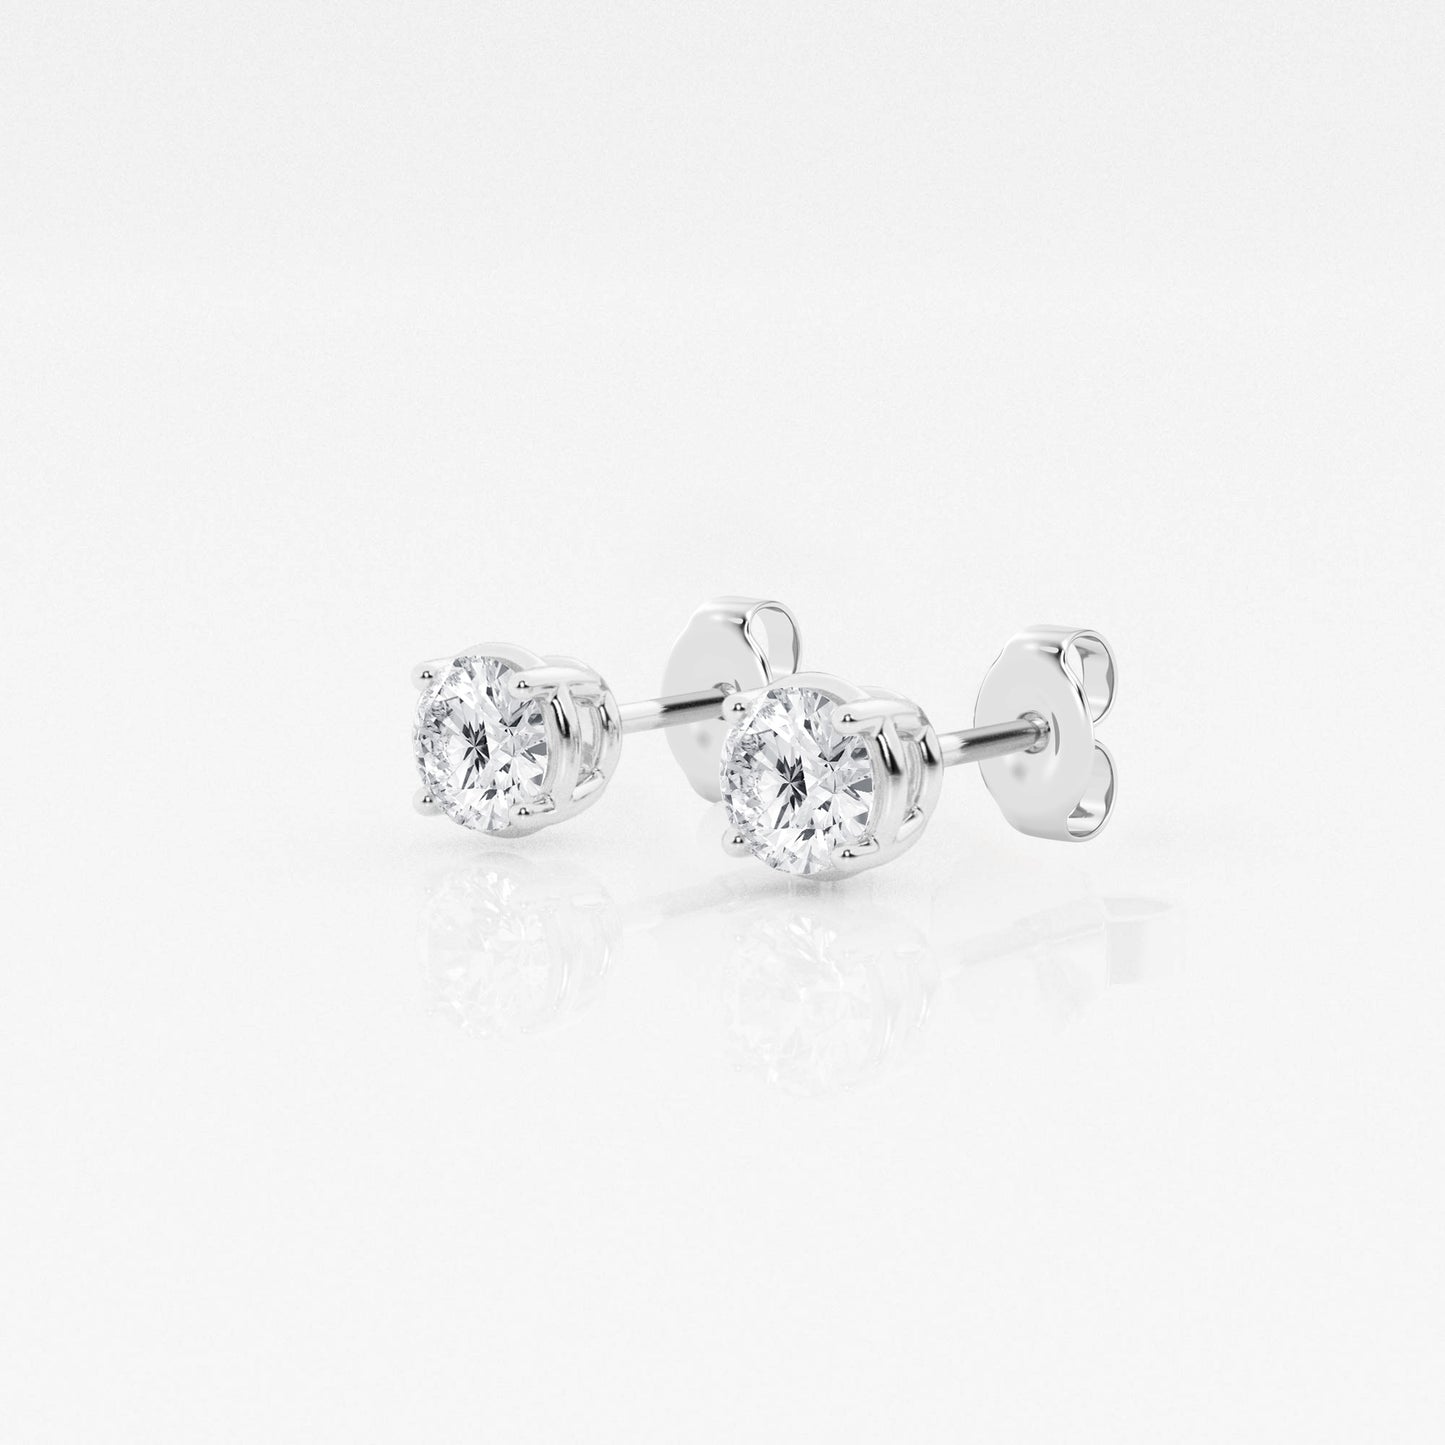 Round Solitaire earrings with four prongs